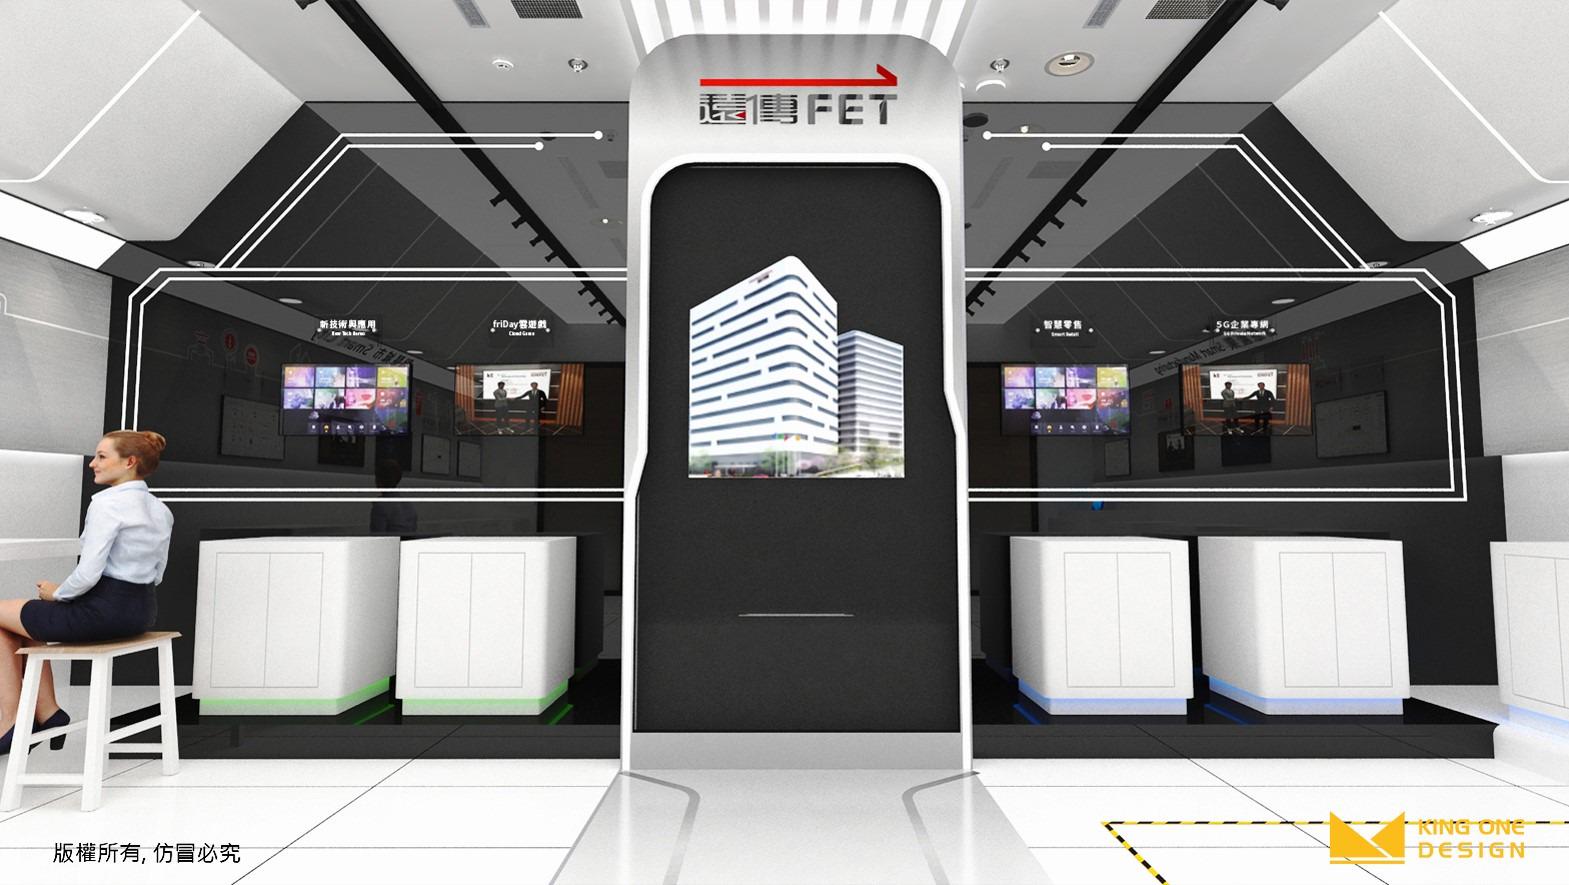 Commercial Space Design, Space Design, King One Design, FET TPKC, Immersive Space Design, showroom, showroom in Taipei